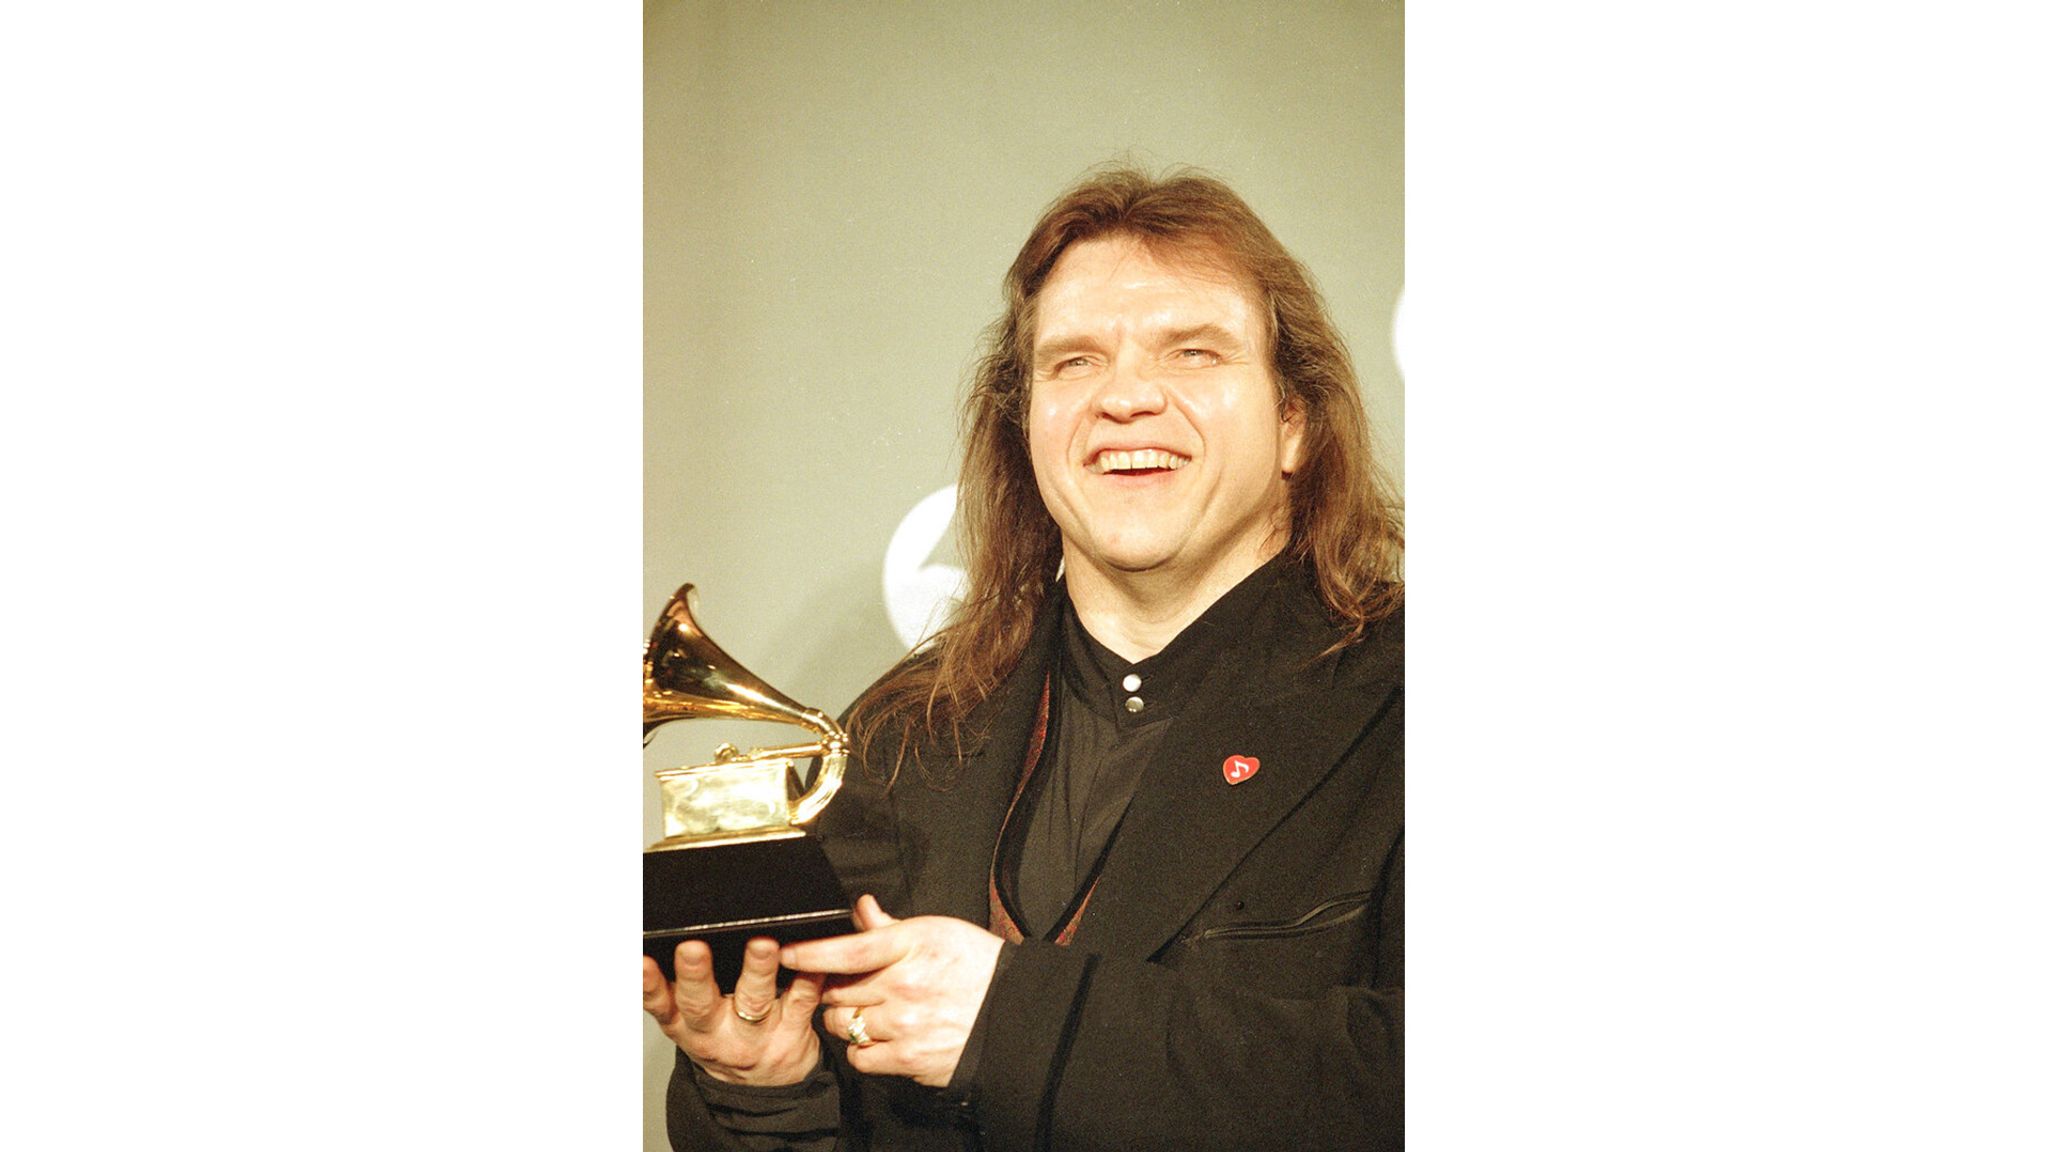 Meat Loaf in 1994 with his Grammy for best solo rock performance. Pic: AP